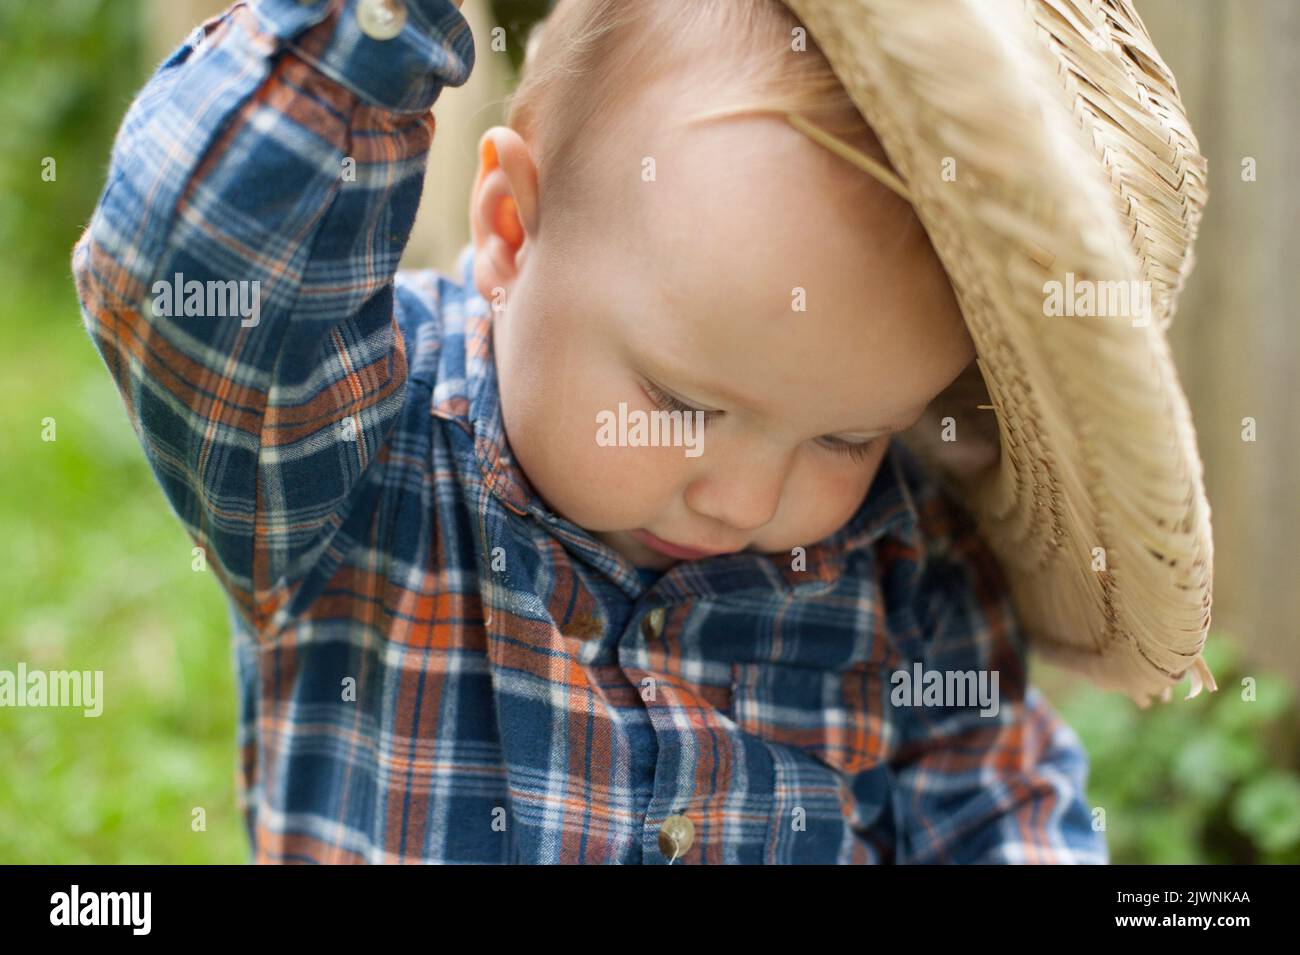 A portrait of a toddler in a plaid shirt and straw hat. Stock Photo